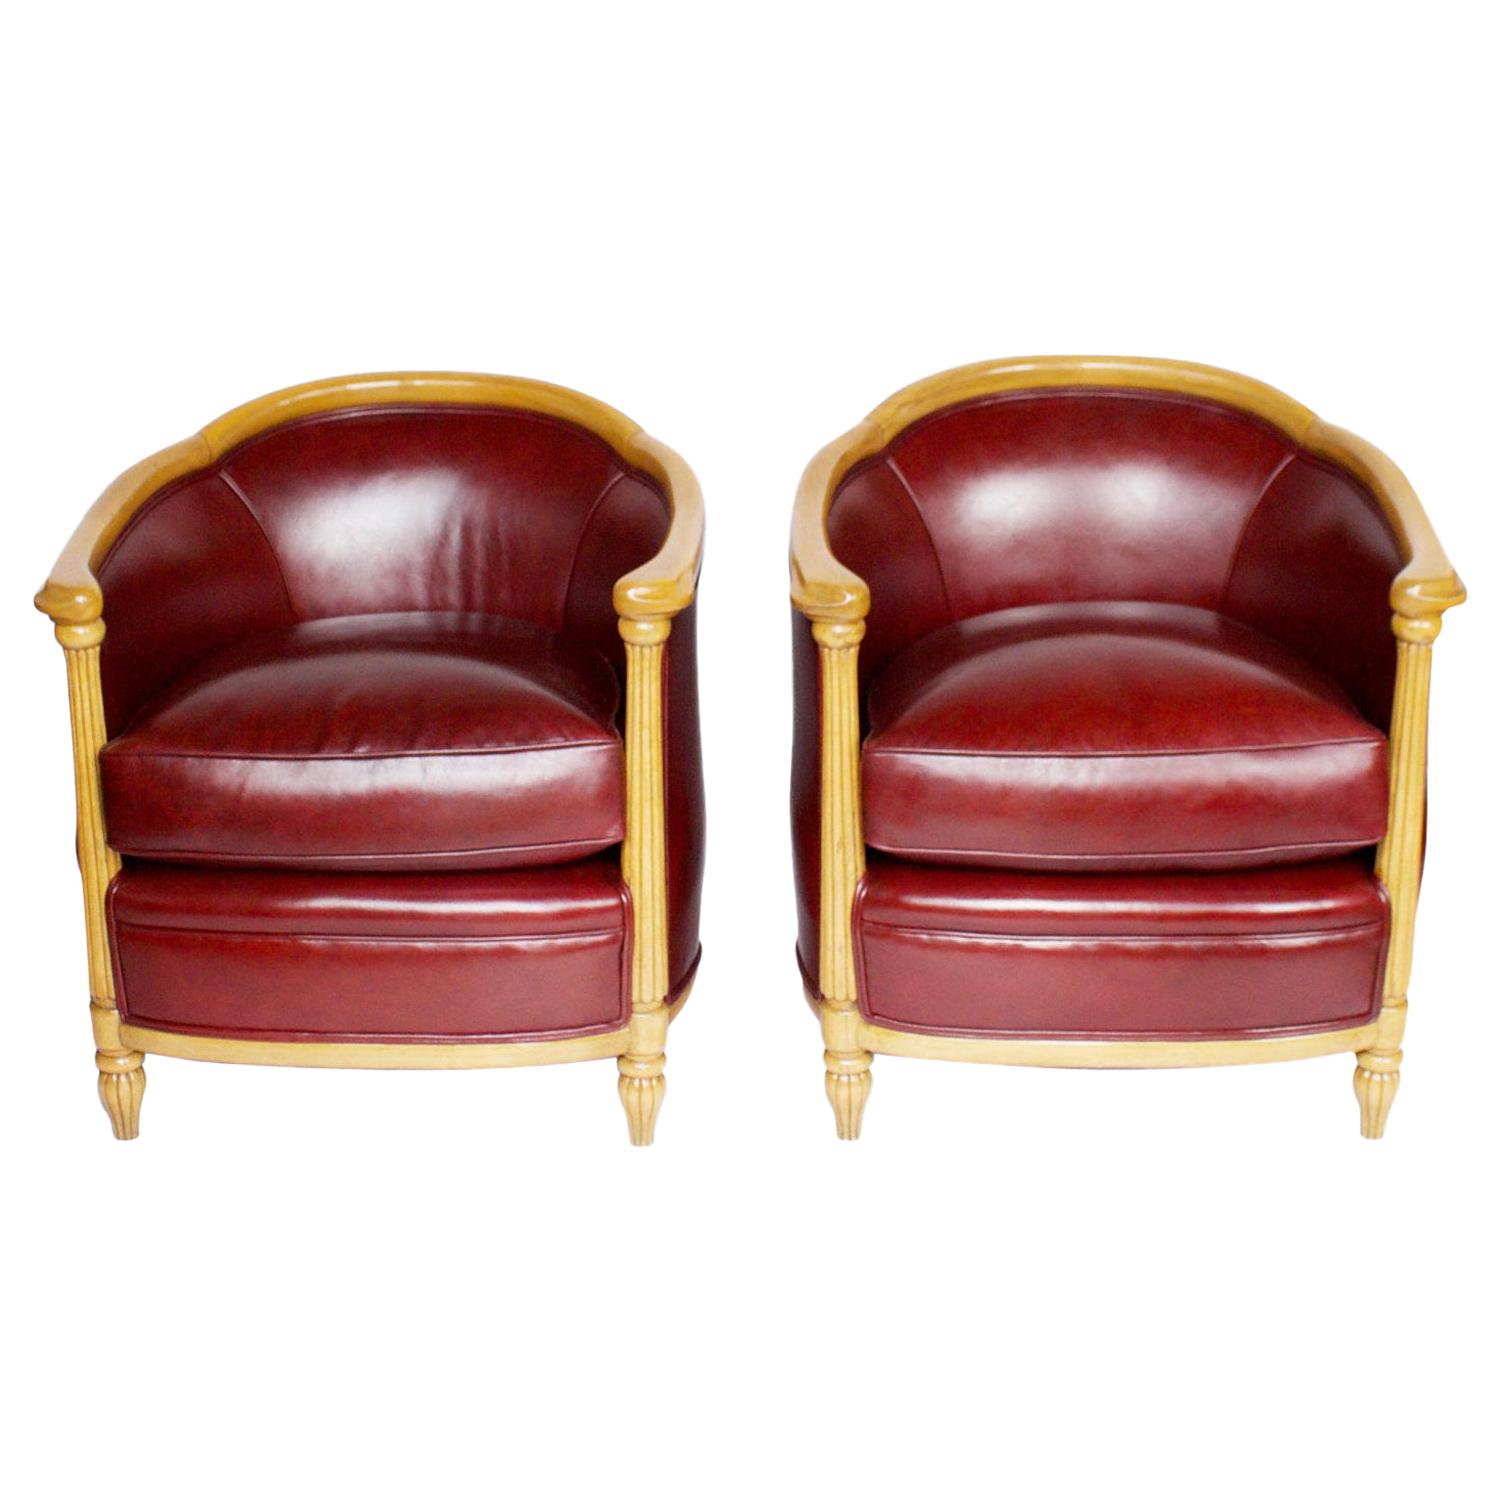 Art Deco Pair of Tub Chairs Upholstered in Red Leather, circa 1930